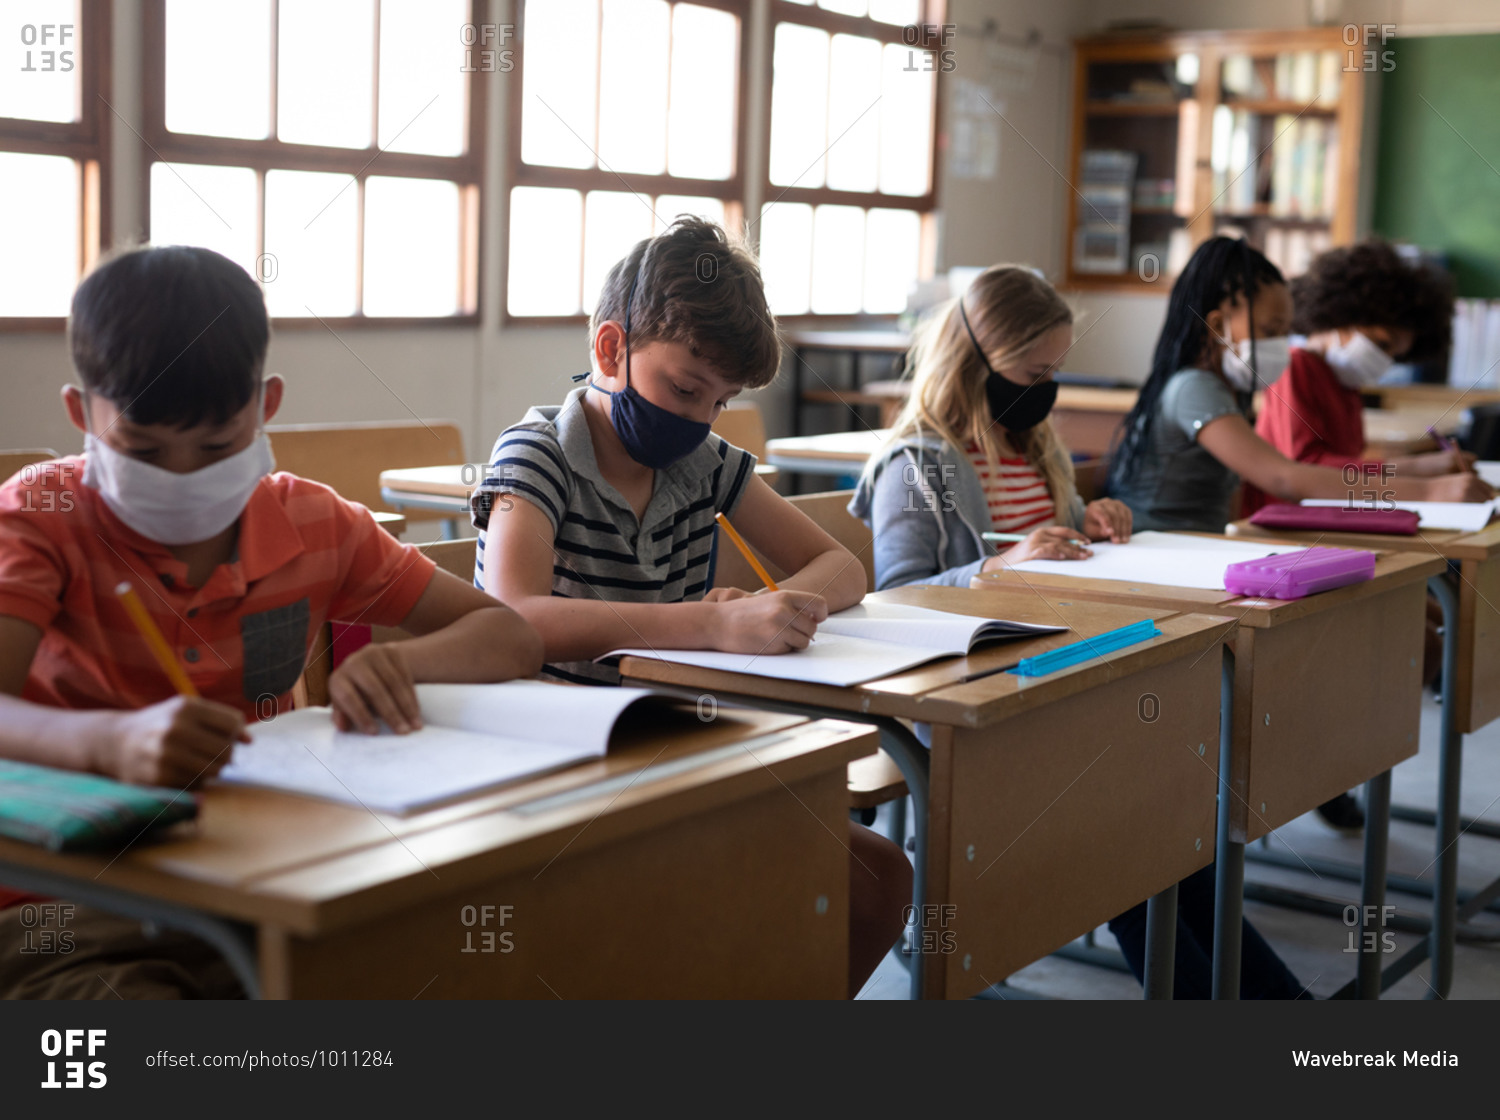 Multi ethnic group of elementary school children sitting at desks wearing face masks in classroom. Primary education social distancing health safety during Covid19 Coronavirus pandemic.